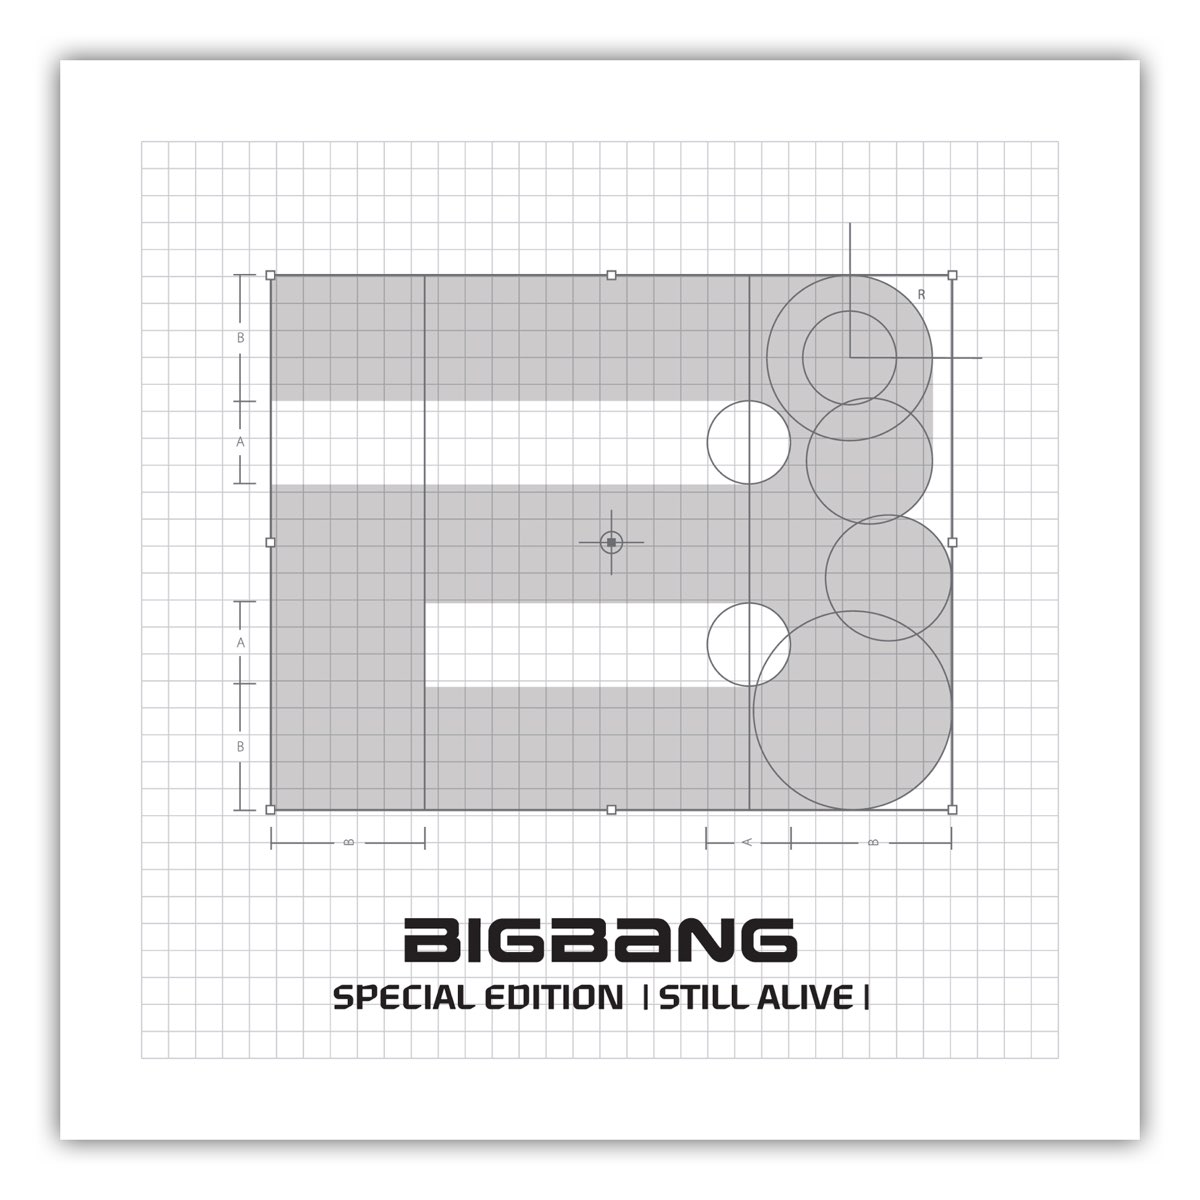 Special Edition 'Still Alive' - Album by BIGBANG - Apple Music